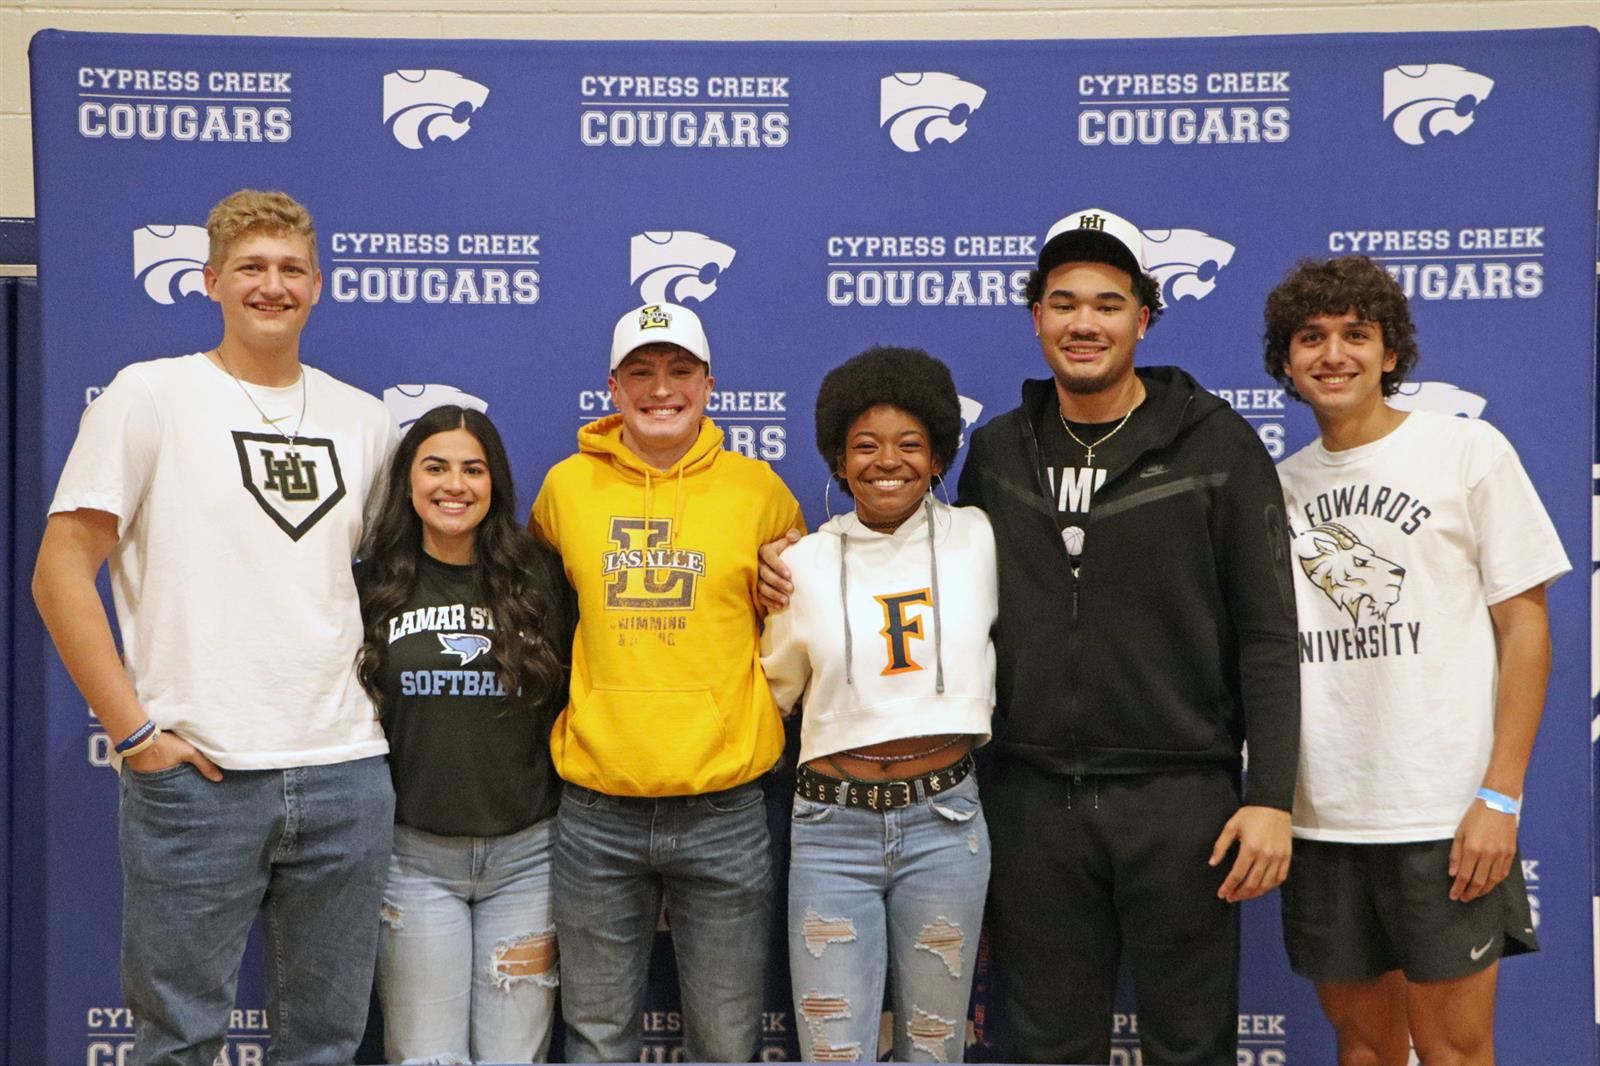 Six Cypress Creek seniors were recognized for signing letters of intent on the first day of the signing period.